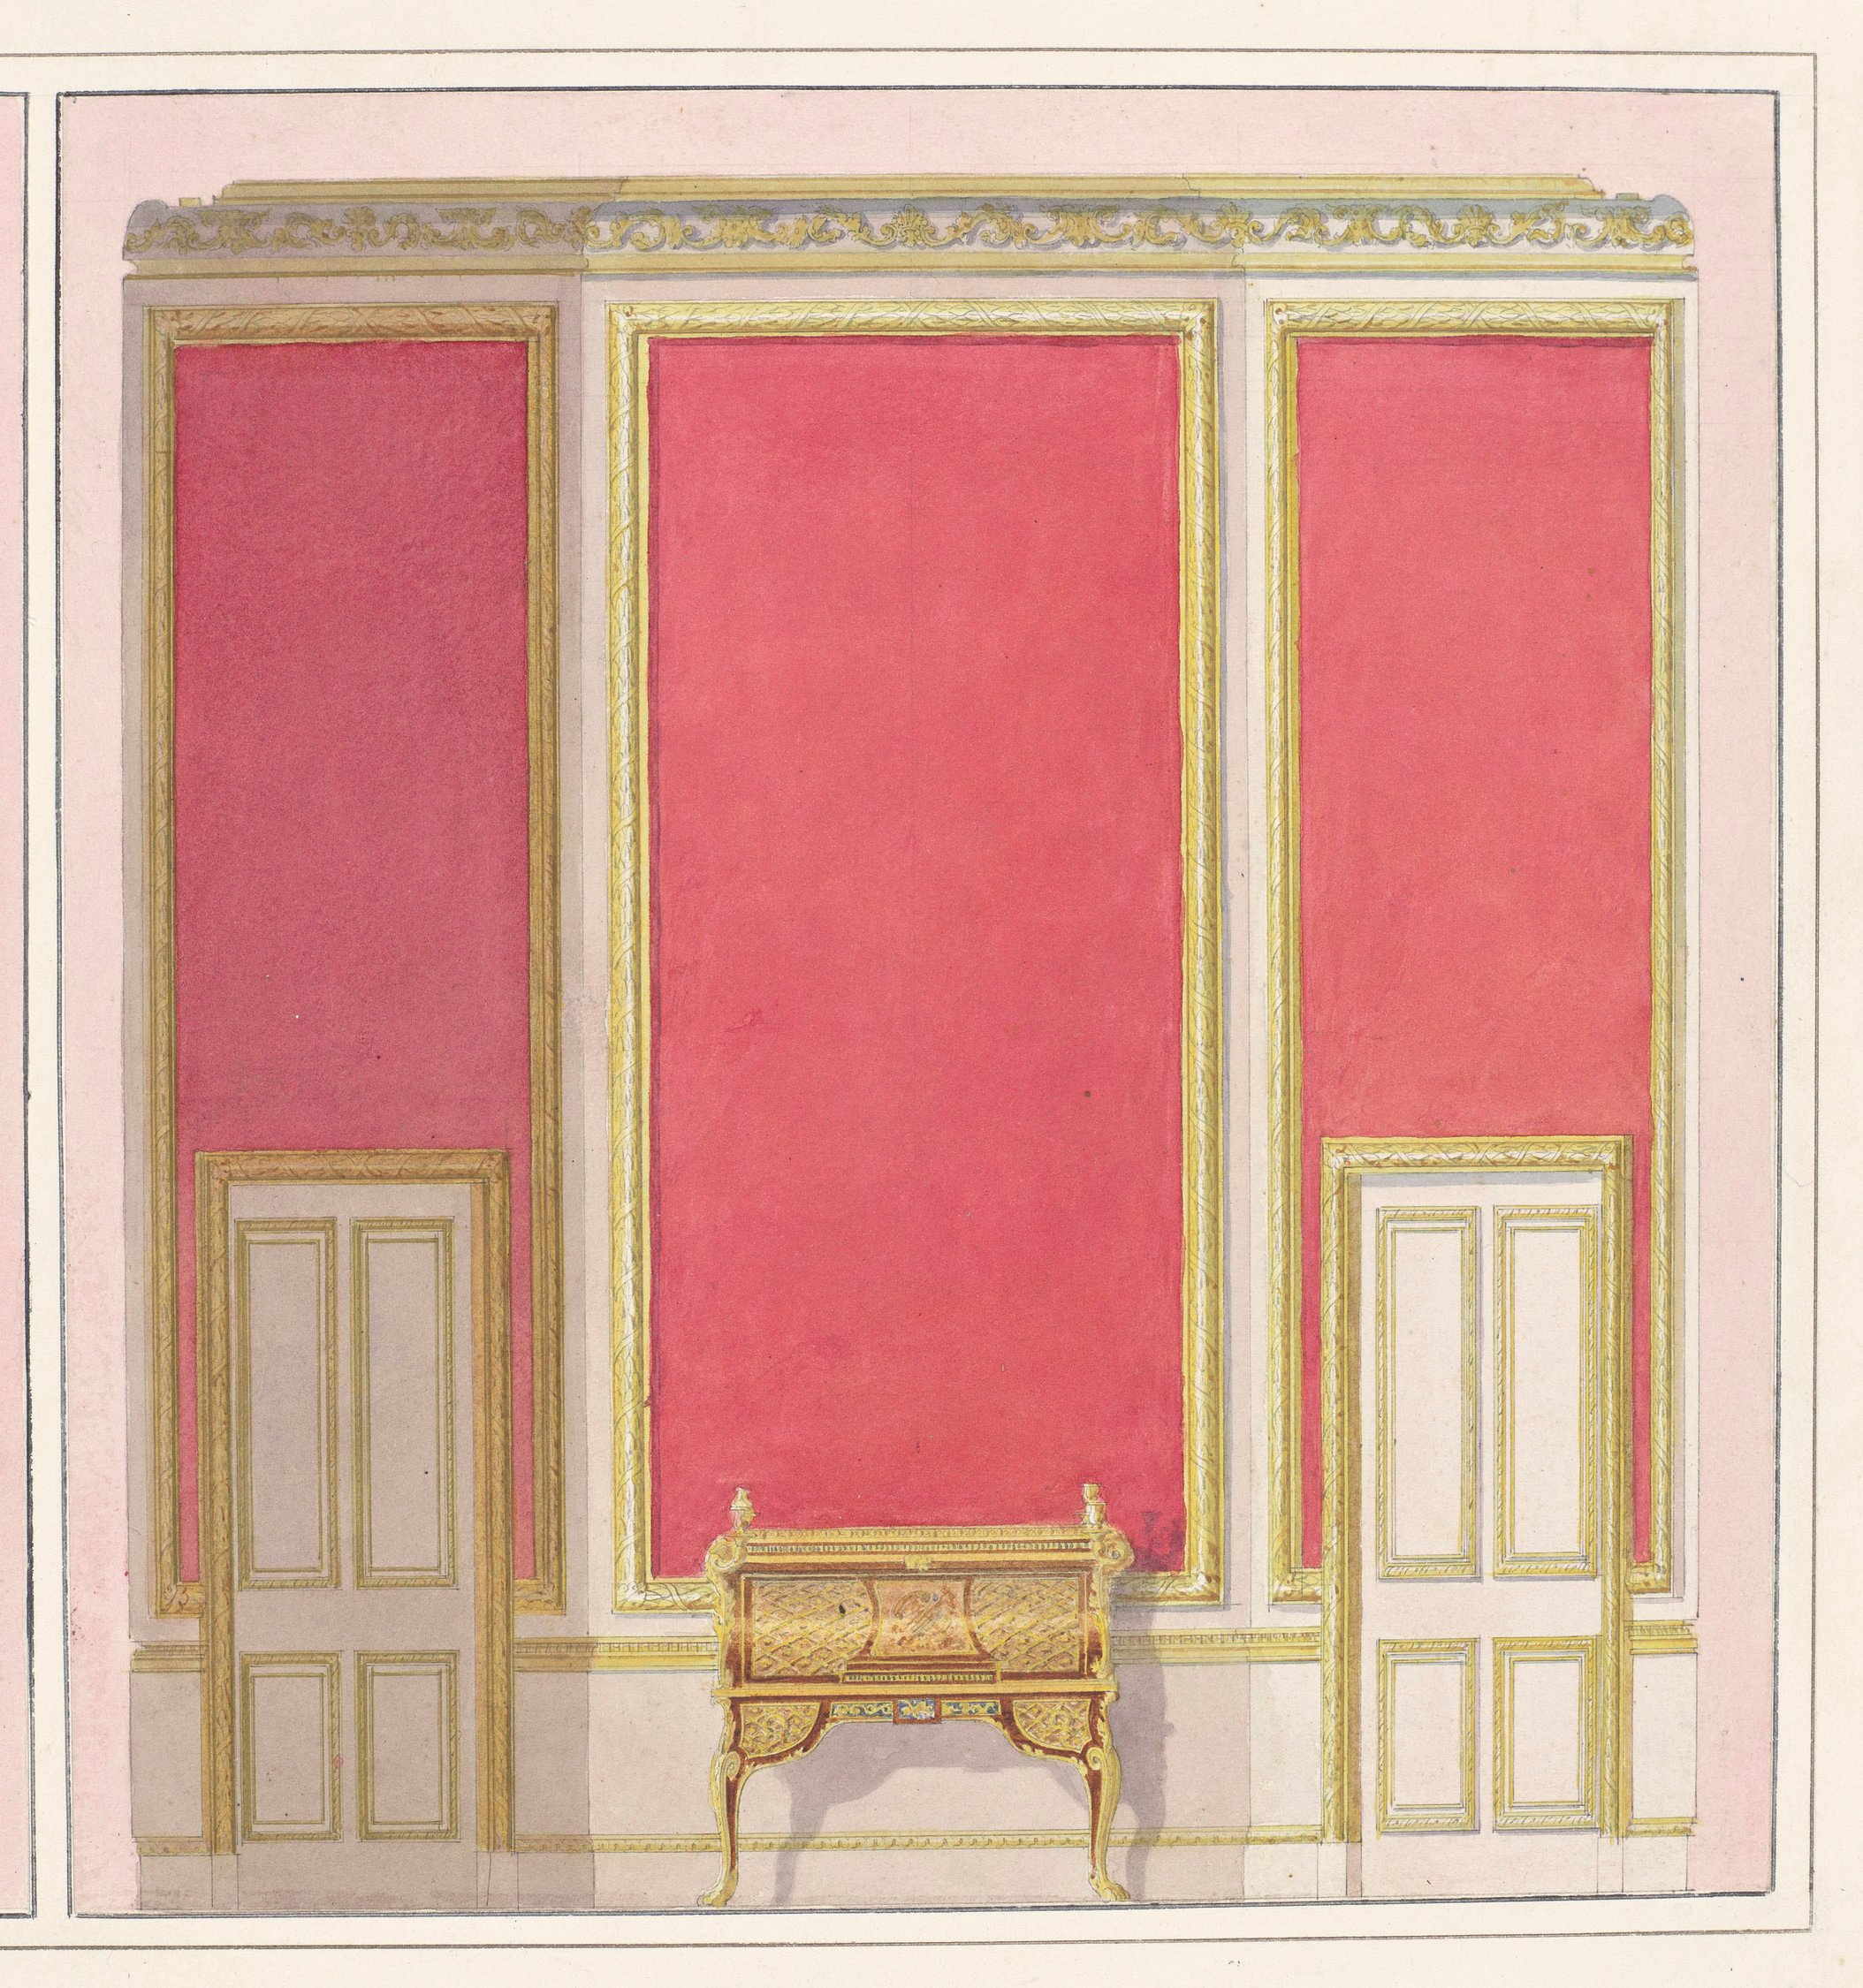 A design for the elevation of the north wall, the panelled walls decorated in crimson and framed with a gold moulding, a Louis XVI bureau &agrave; cylindre in centre. Numbered "14" on mount. Sotheby's lot 171. On shared mount sheet with RCIN 918382.